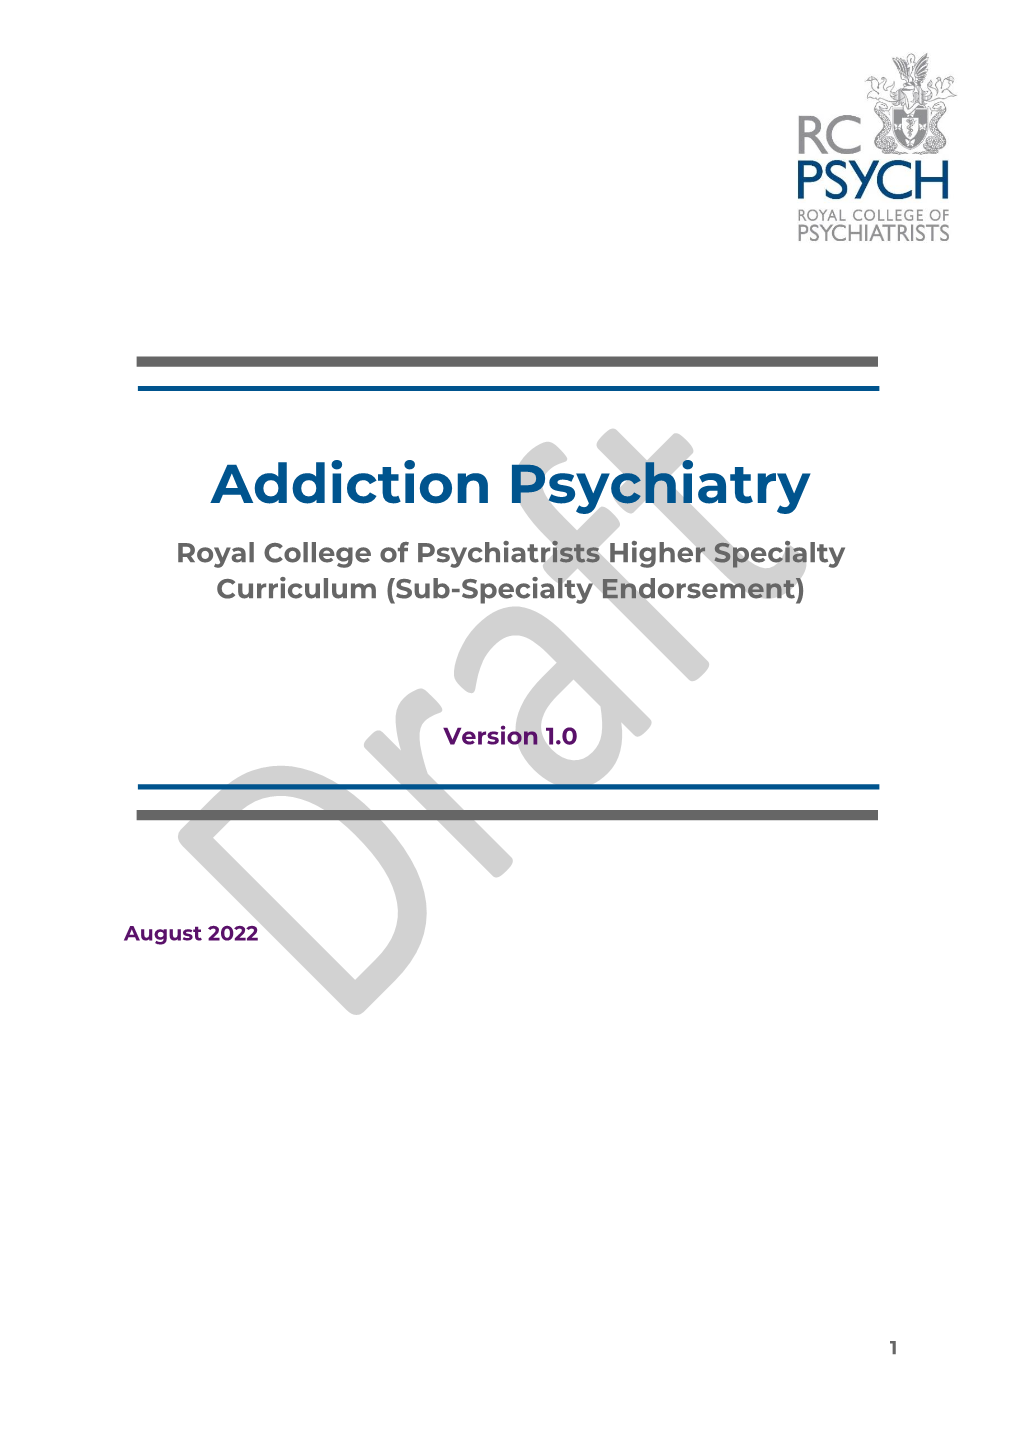 Addiction Psychiatry Royal College of Psychiatrists Higher Specialty Curriculum (Sub-Specialty Endorsement)